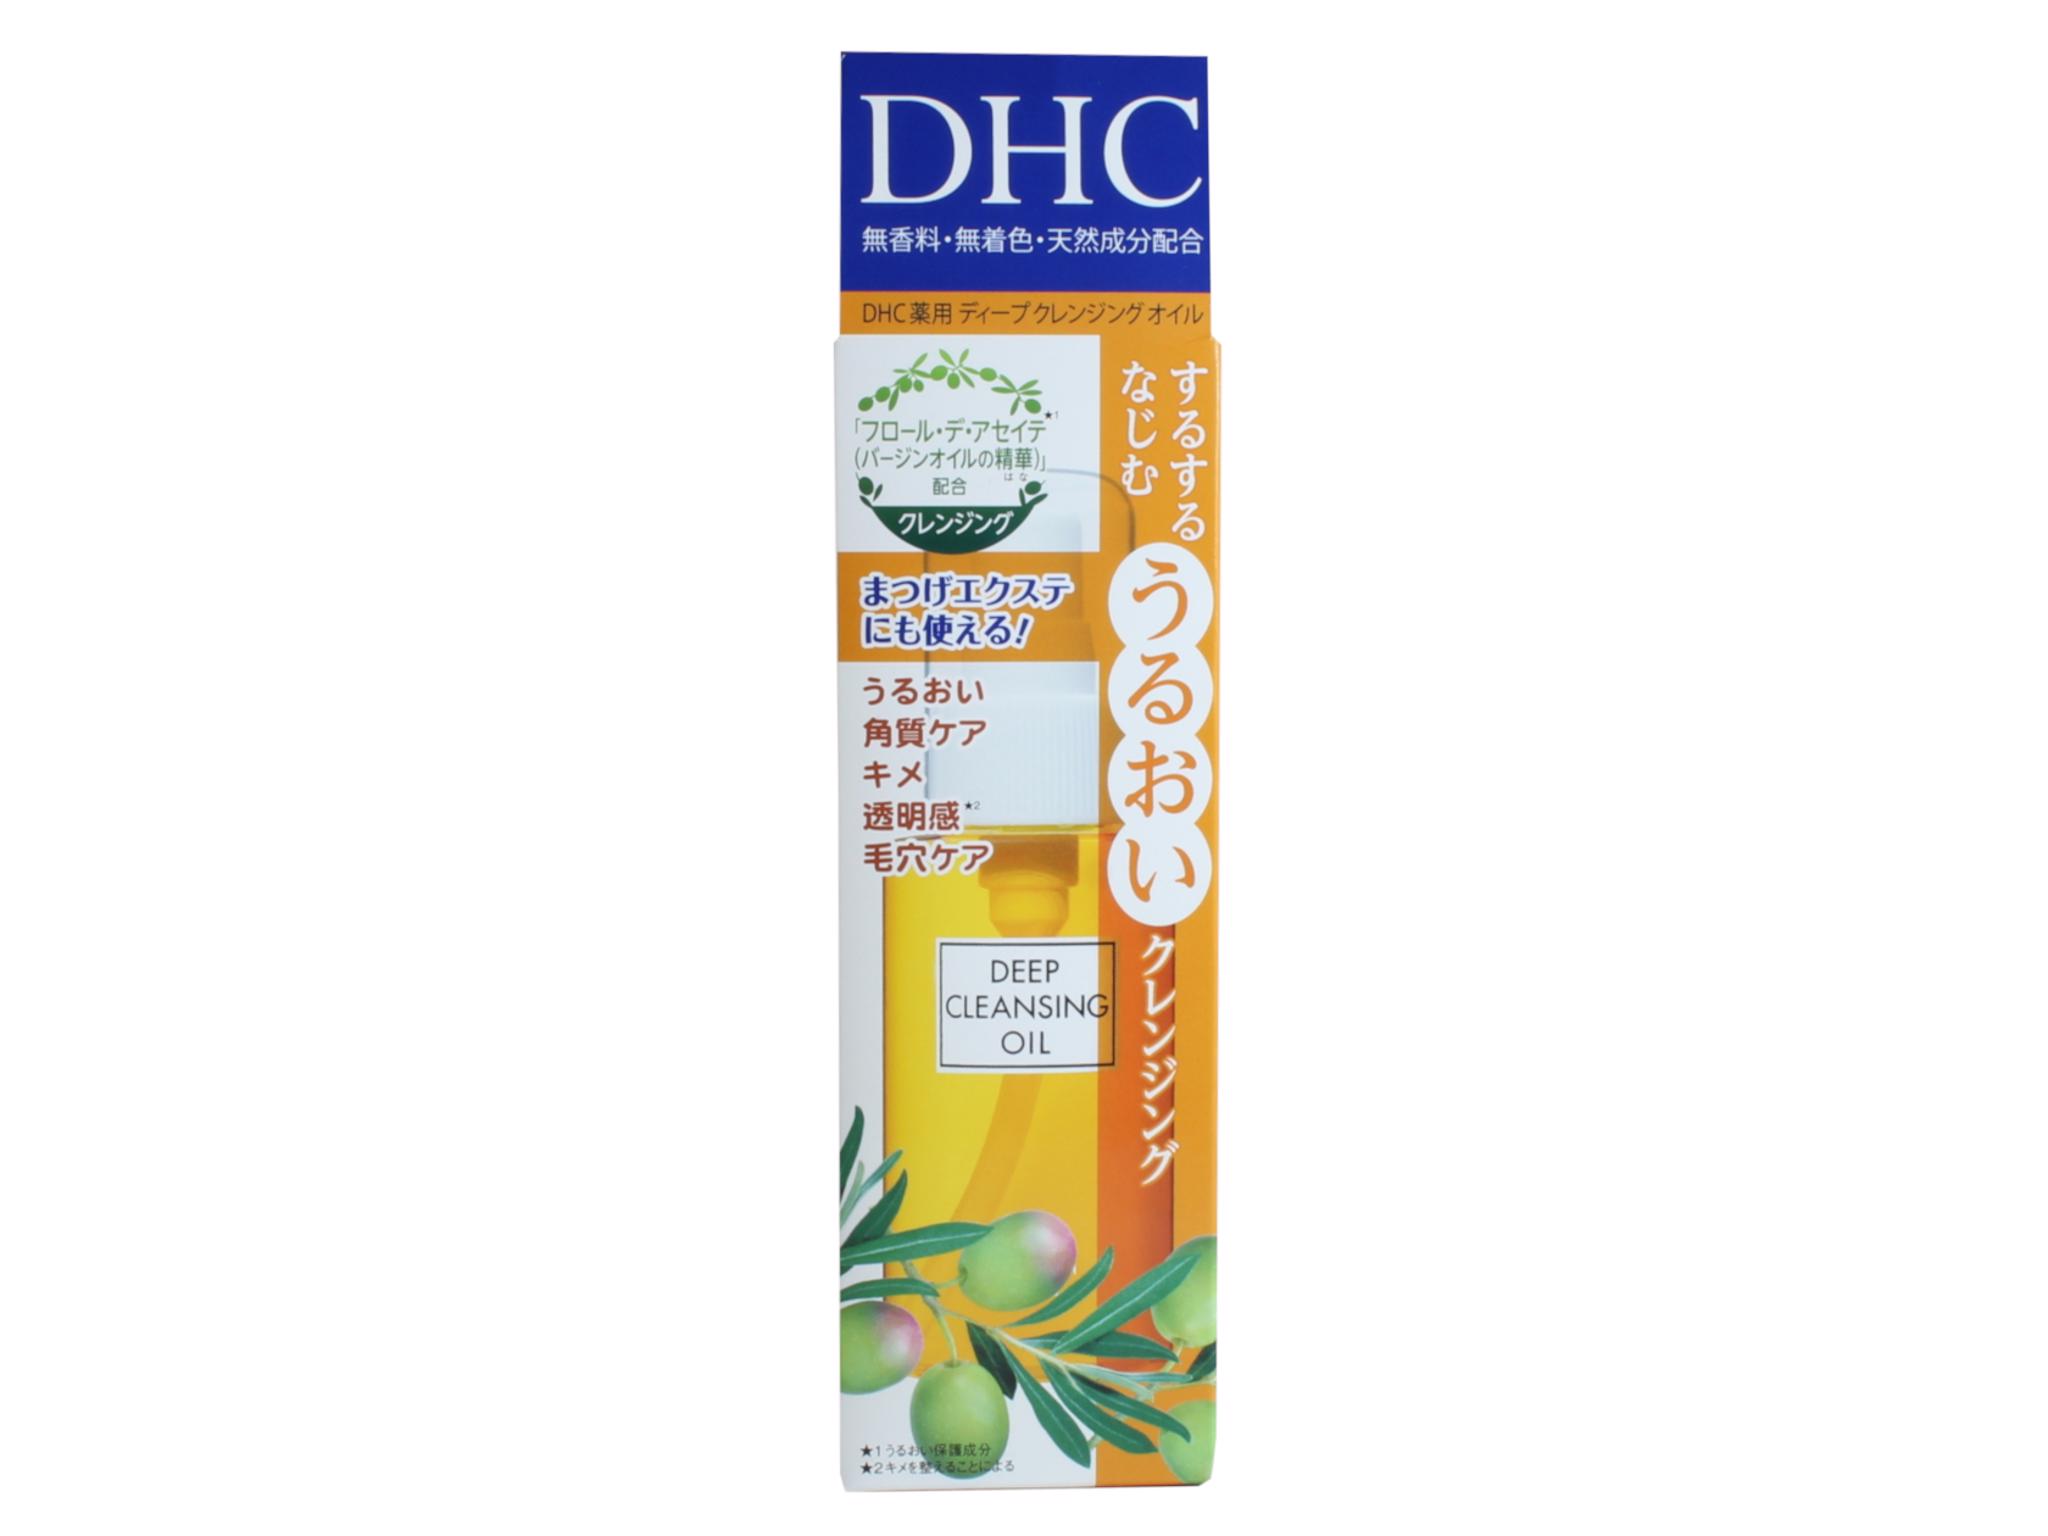 DHC - Deep Cleansing Oil (SS) 70ml 1339